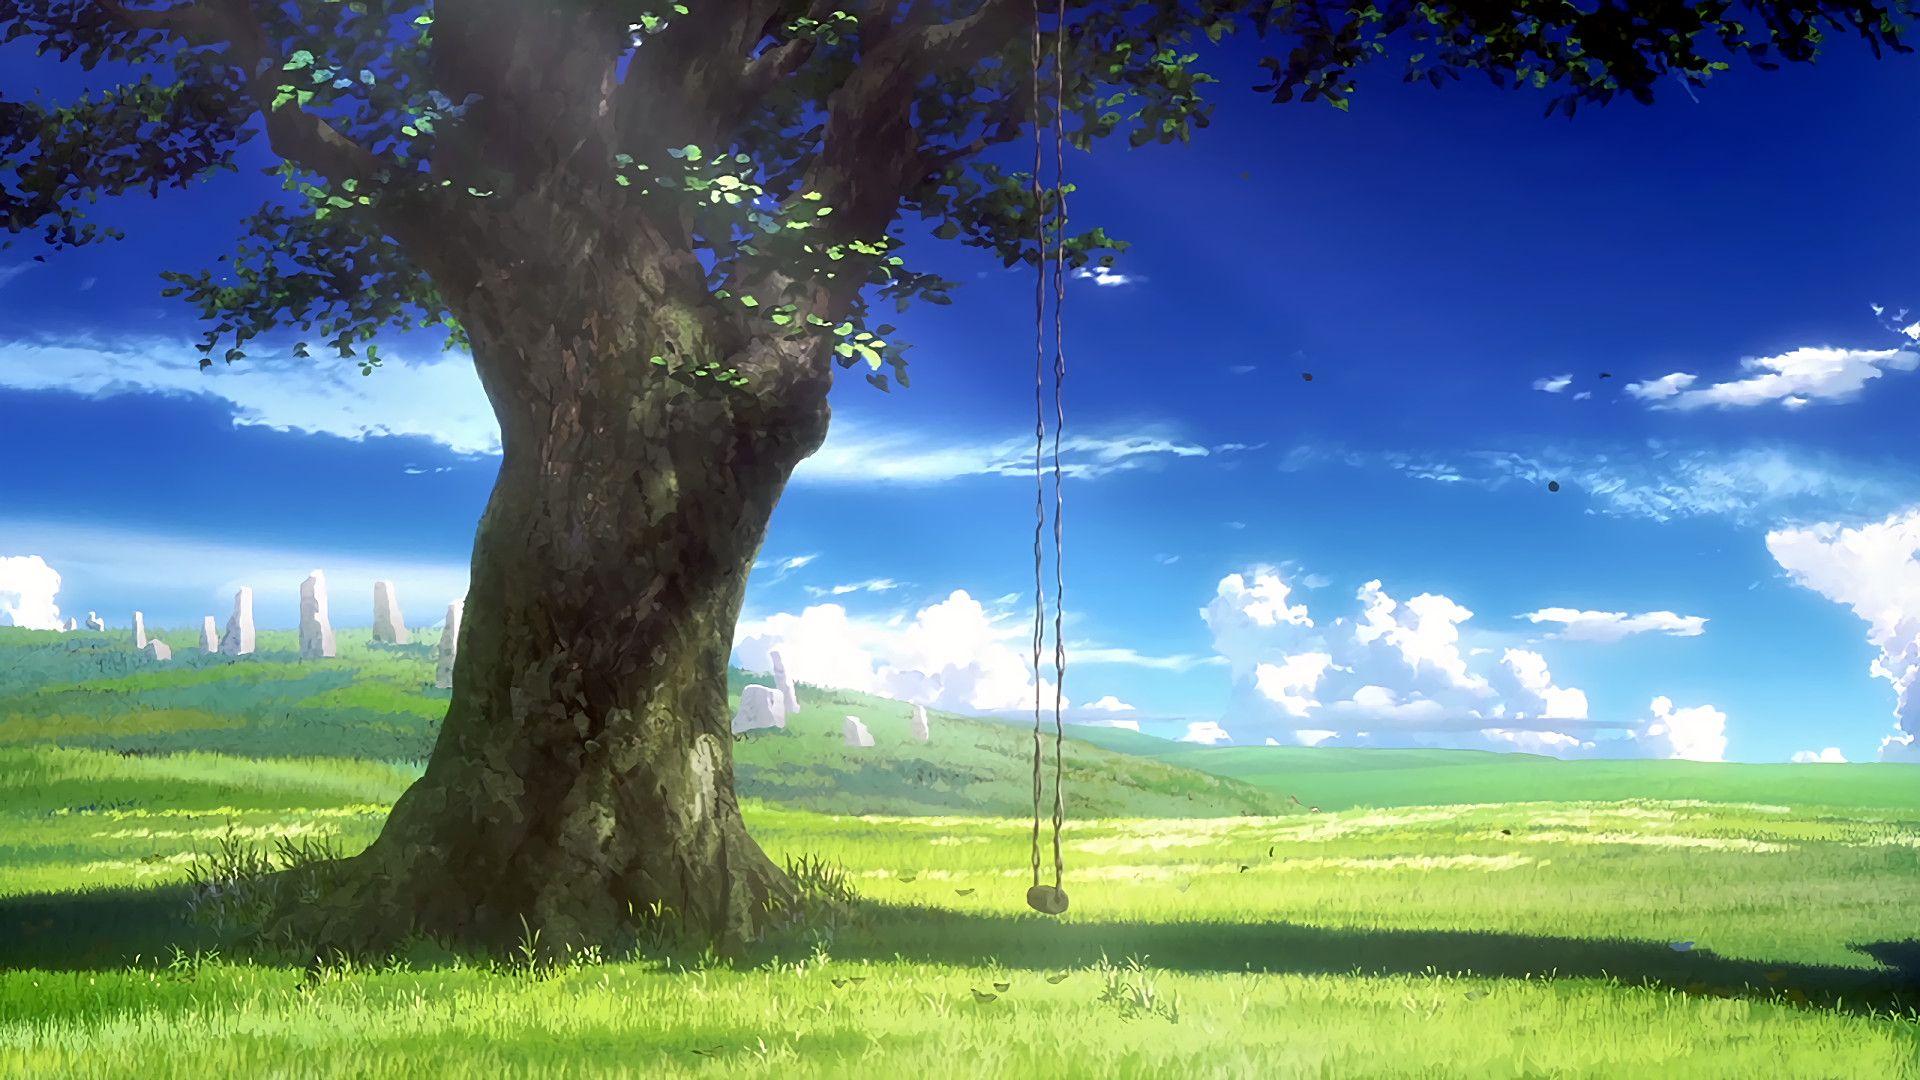 Anime Grass Scenery Wallpapers - Wallpaper Cave